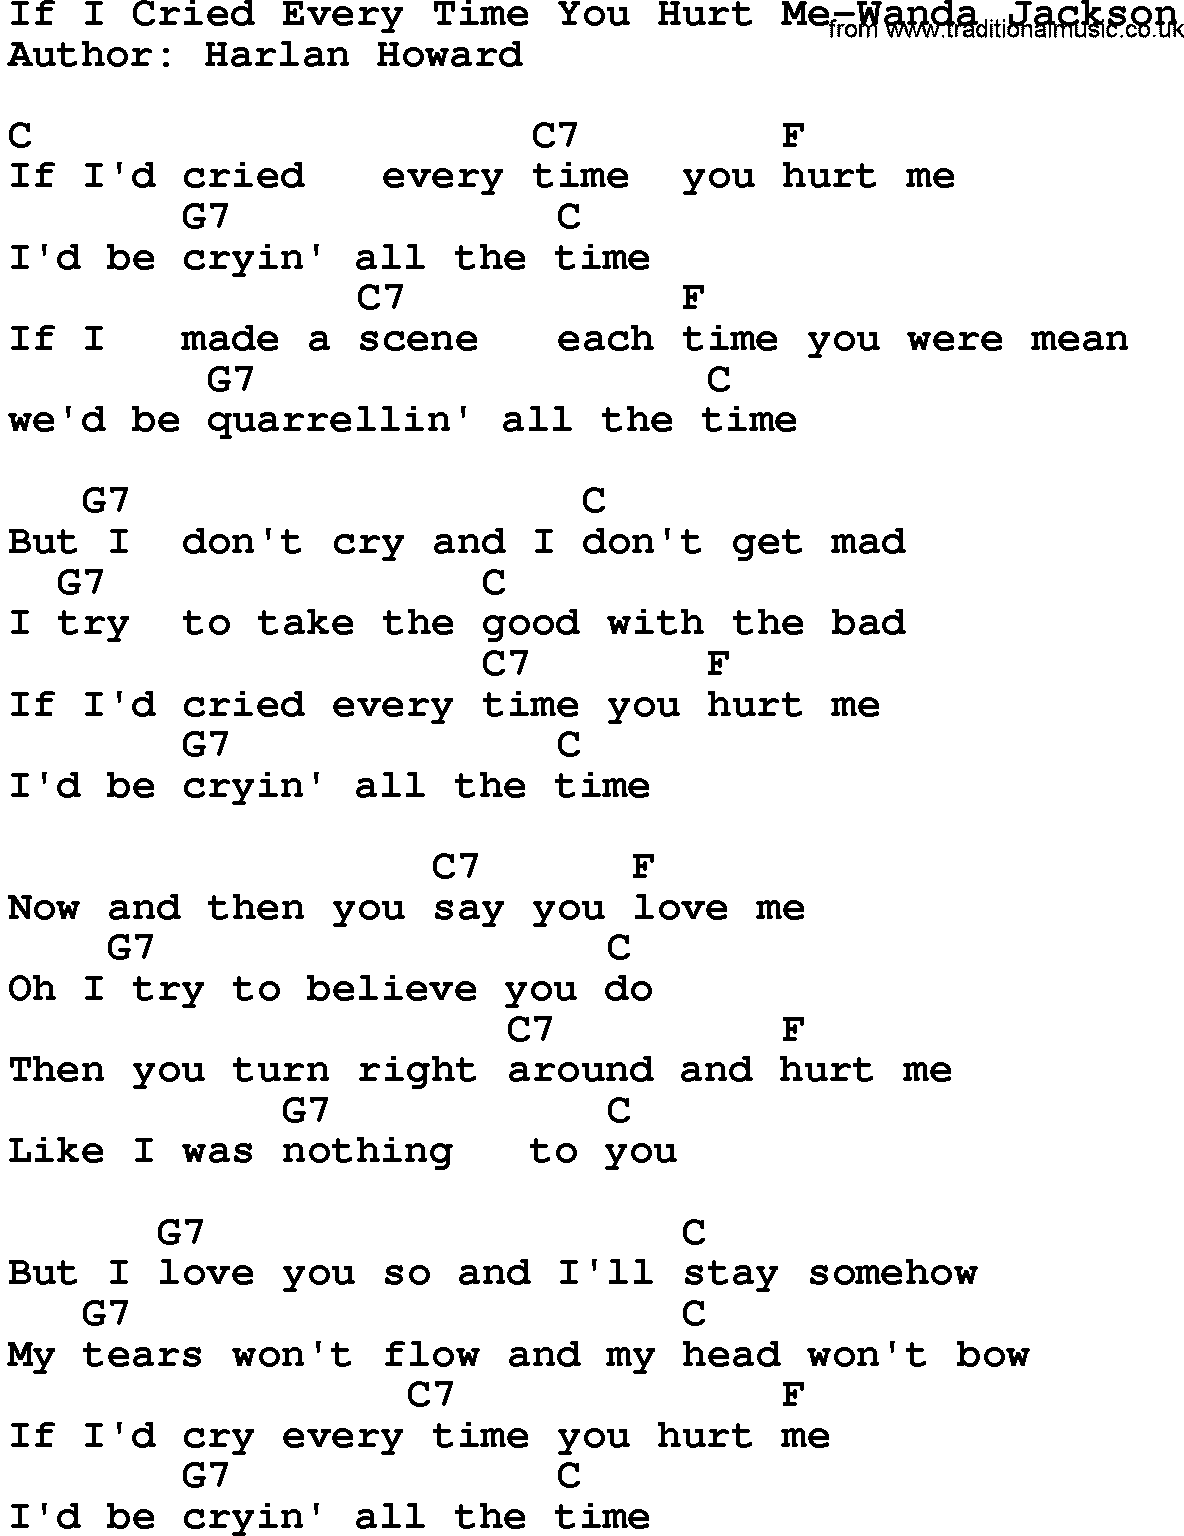 Country music song: If I Cried Every Time You Hurt Me-Wanda Jackson lyrics and chords